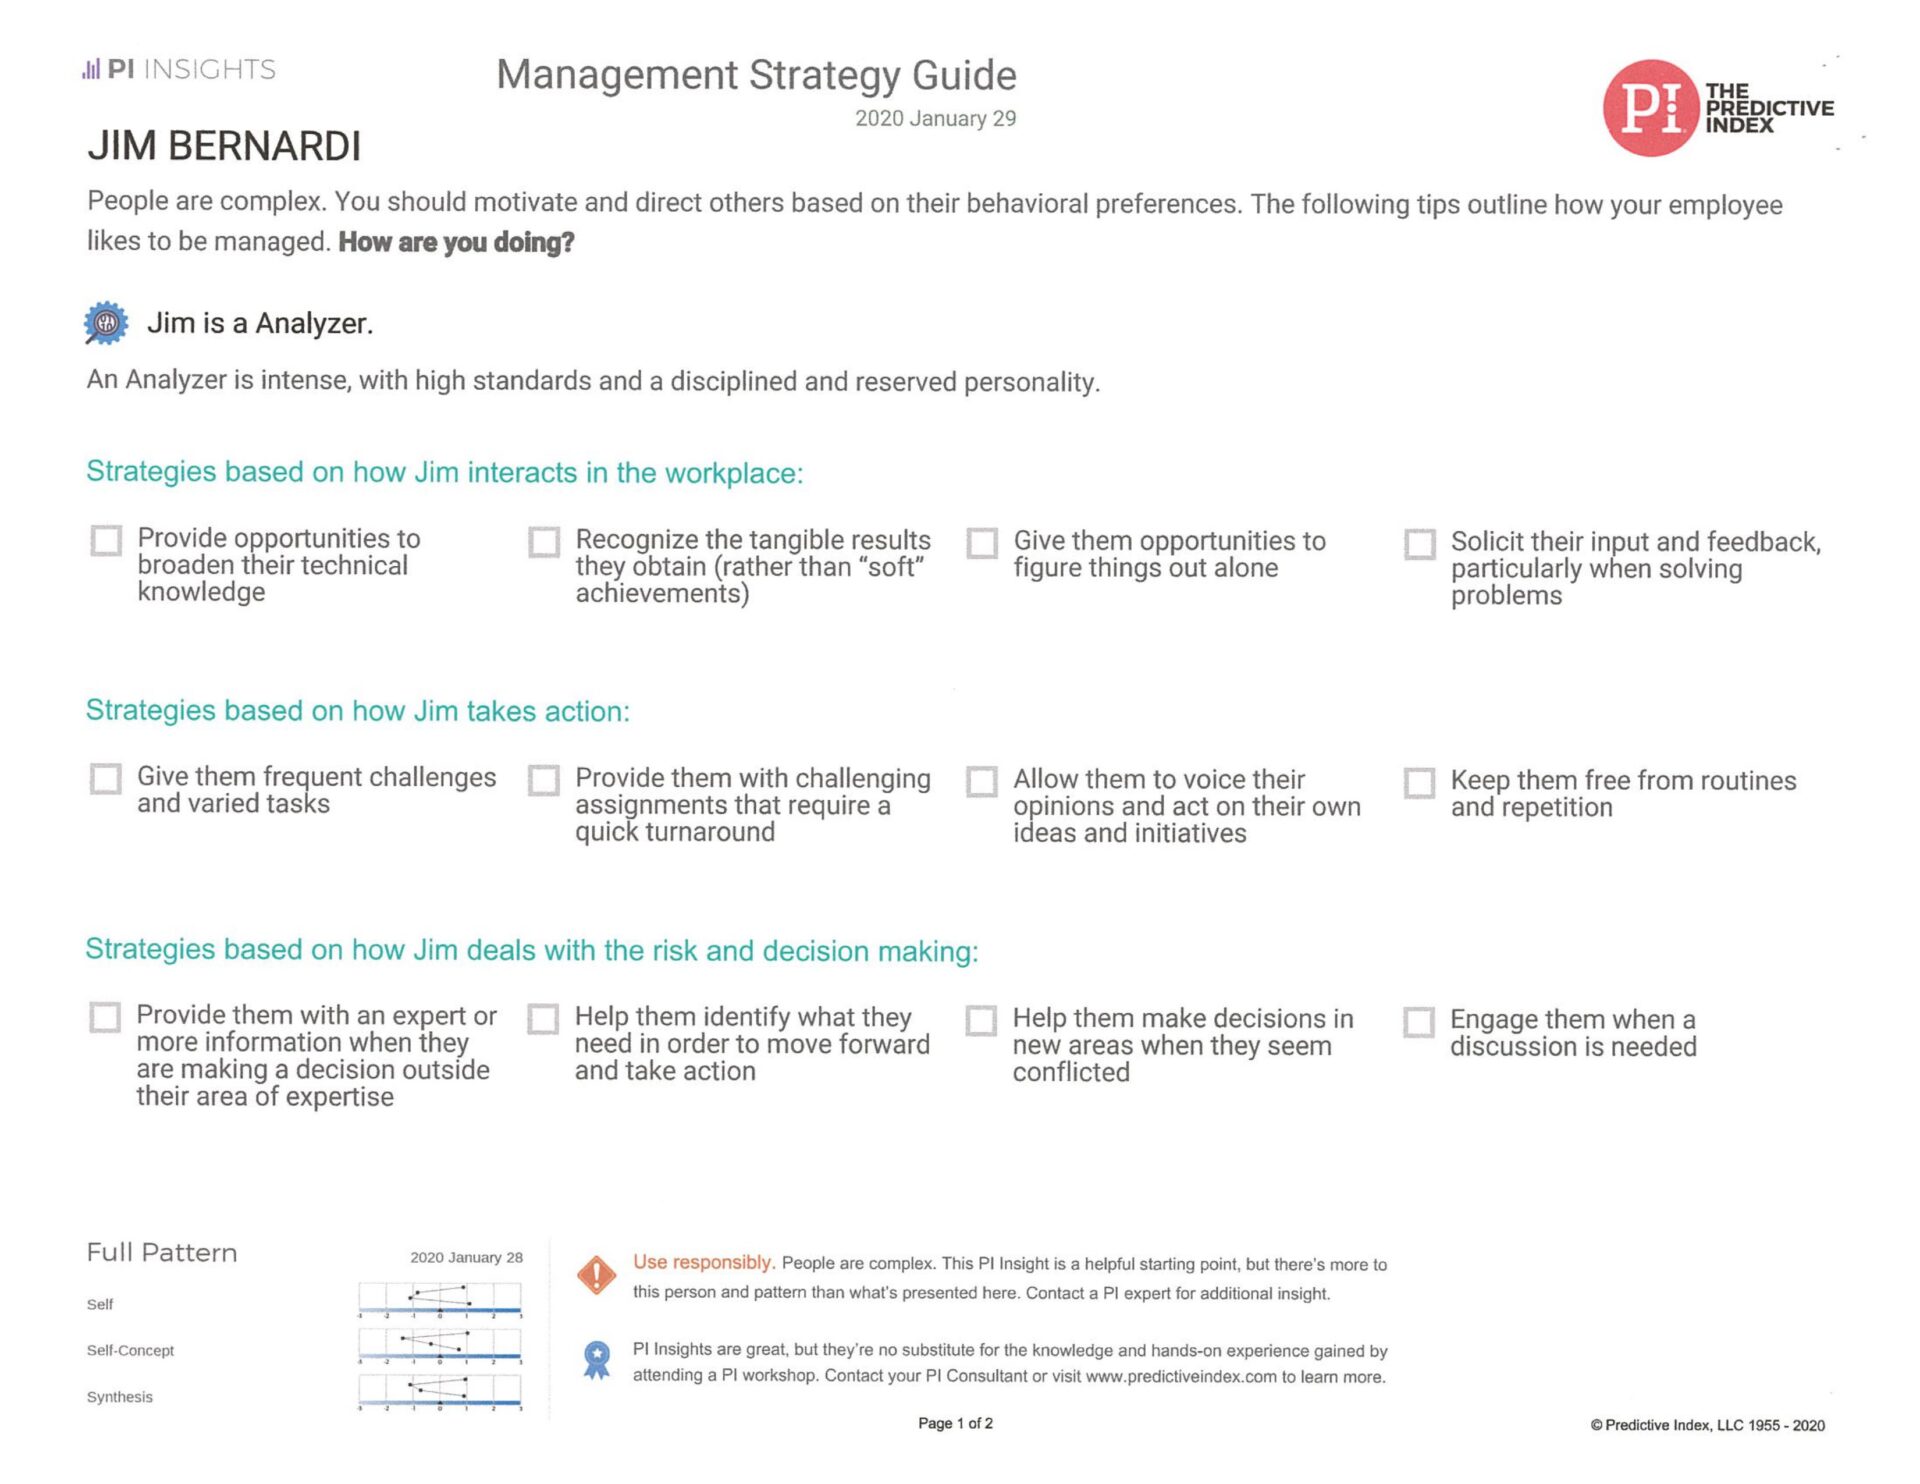 A management strategy guide